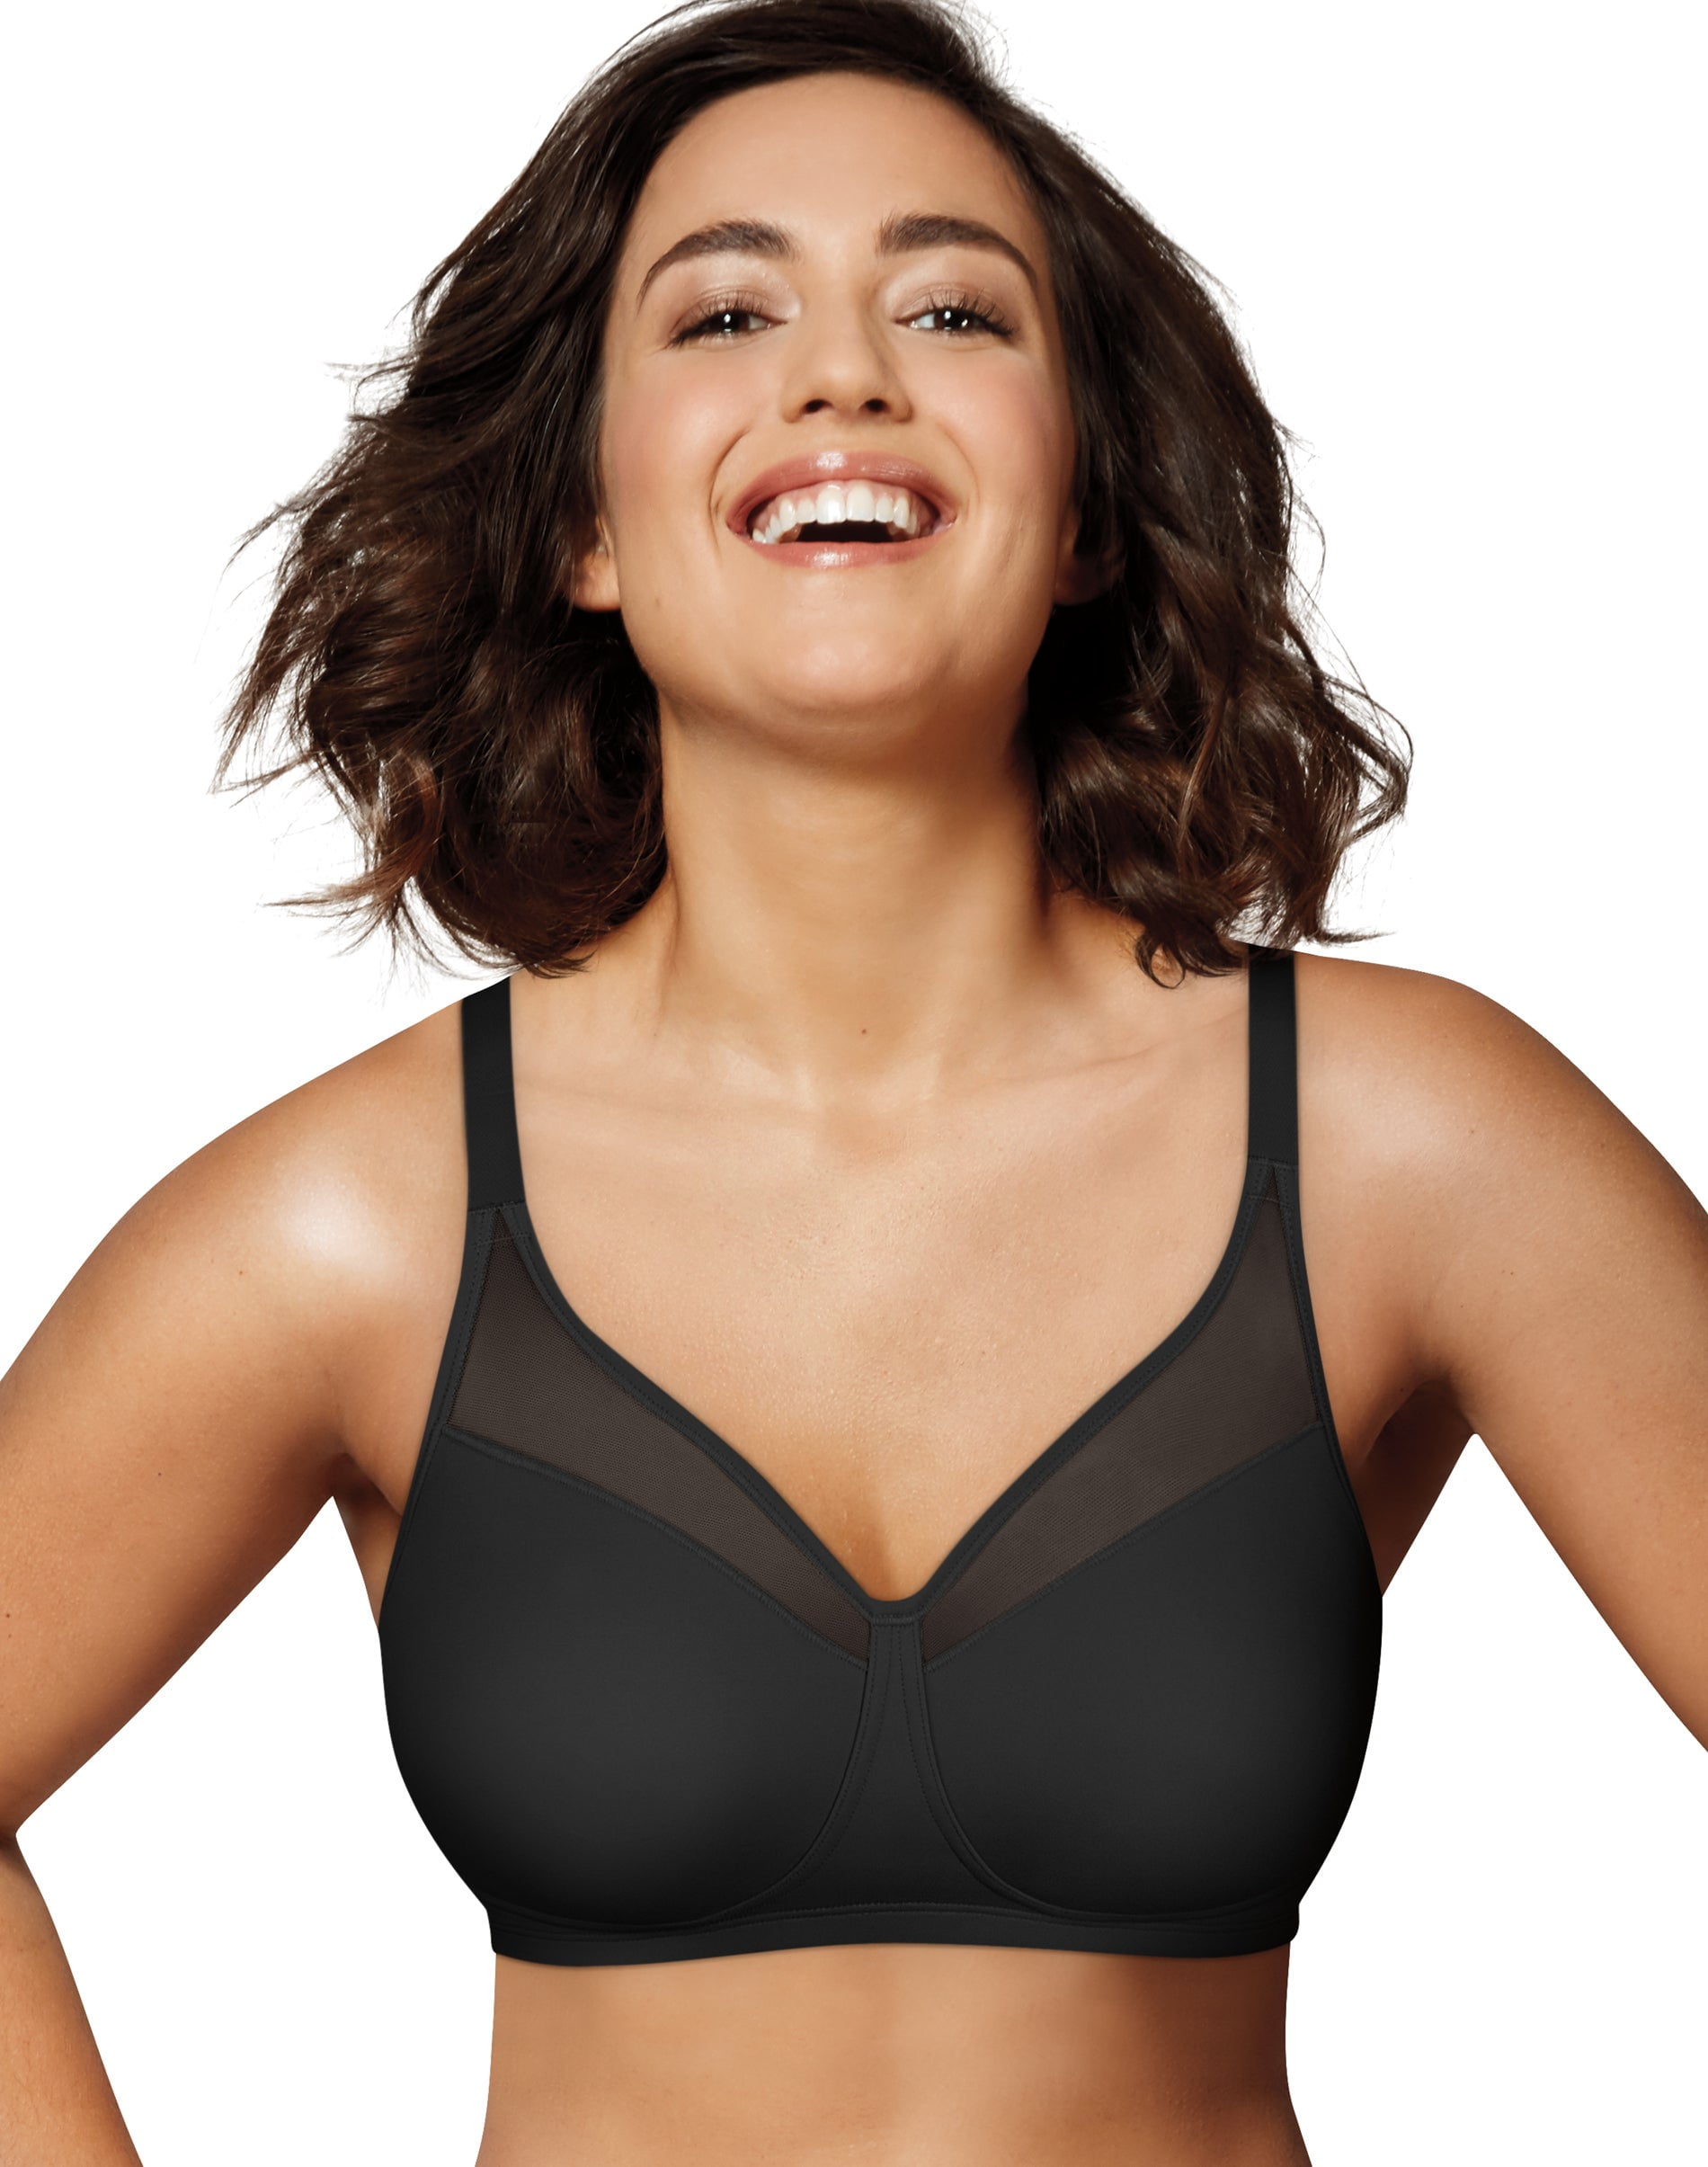 Playtex Wirefree Bra 18 Hour Smoothing Minimizer Smoothing Women's 4697 